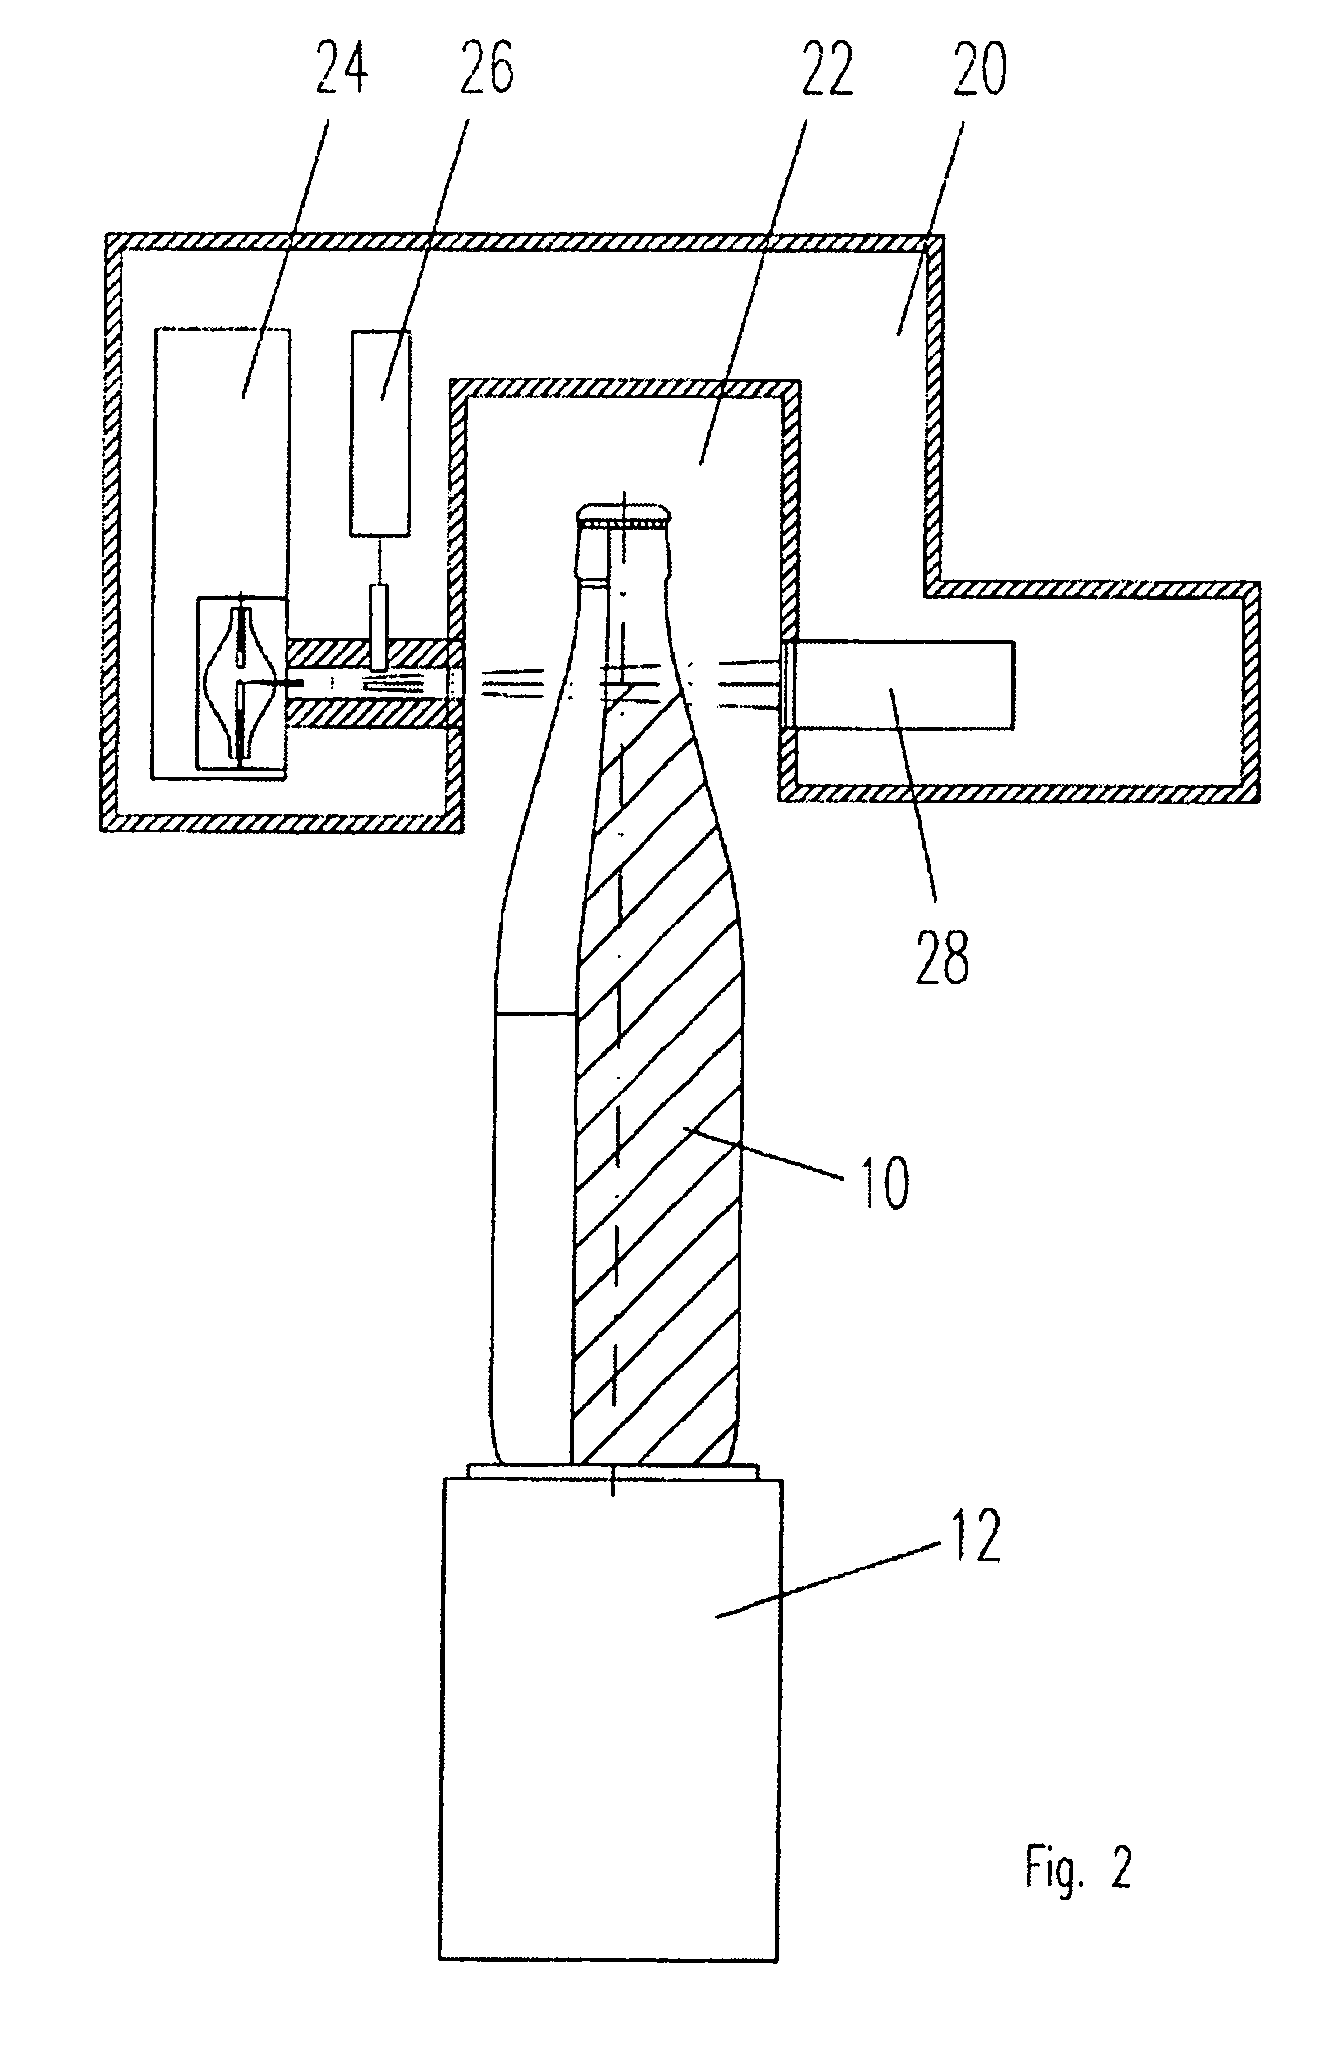 Method of establishing the integrity of a product located in a container